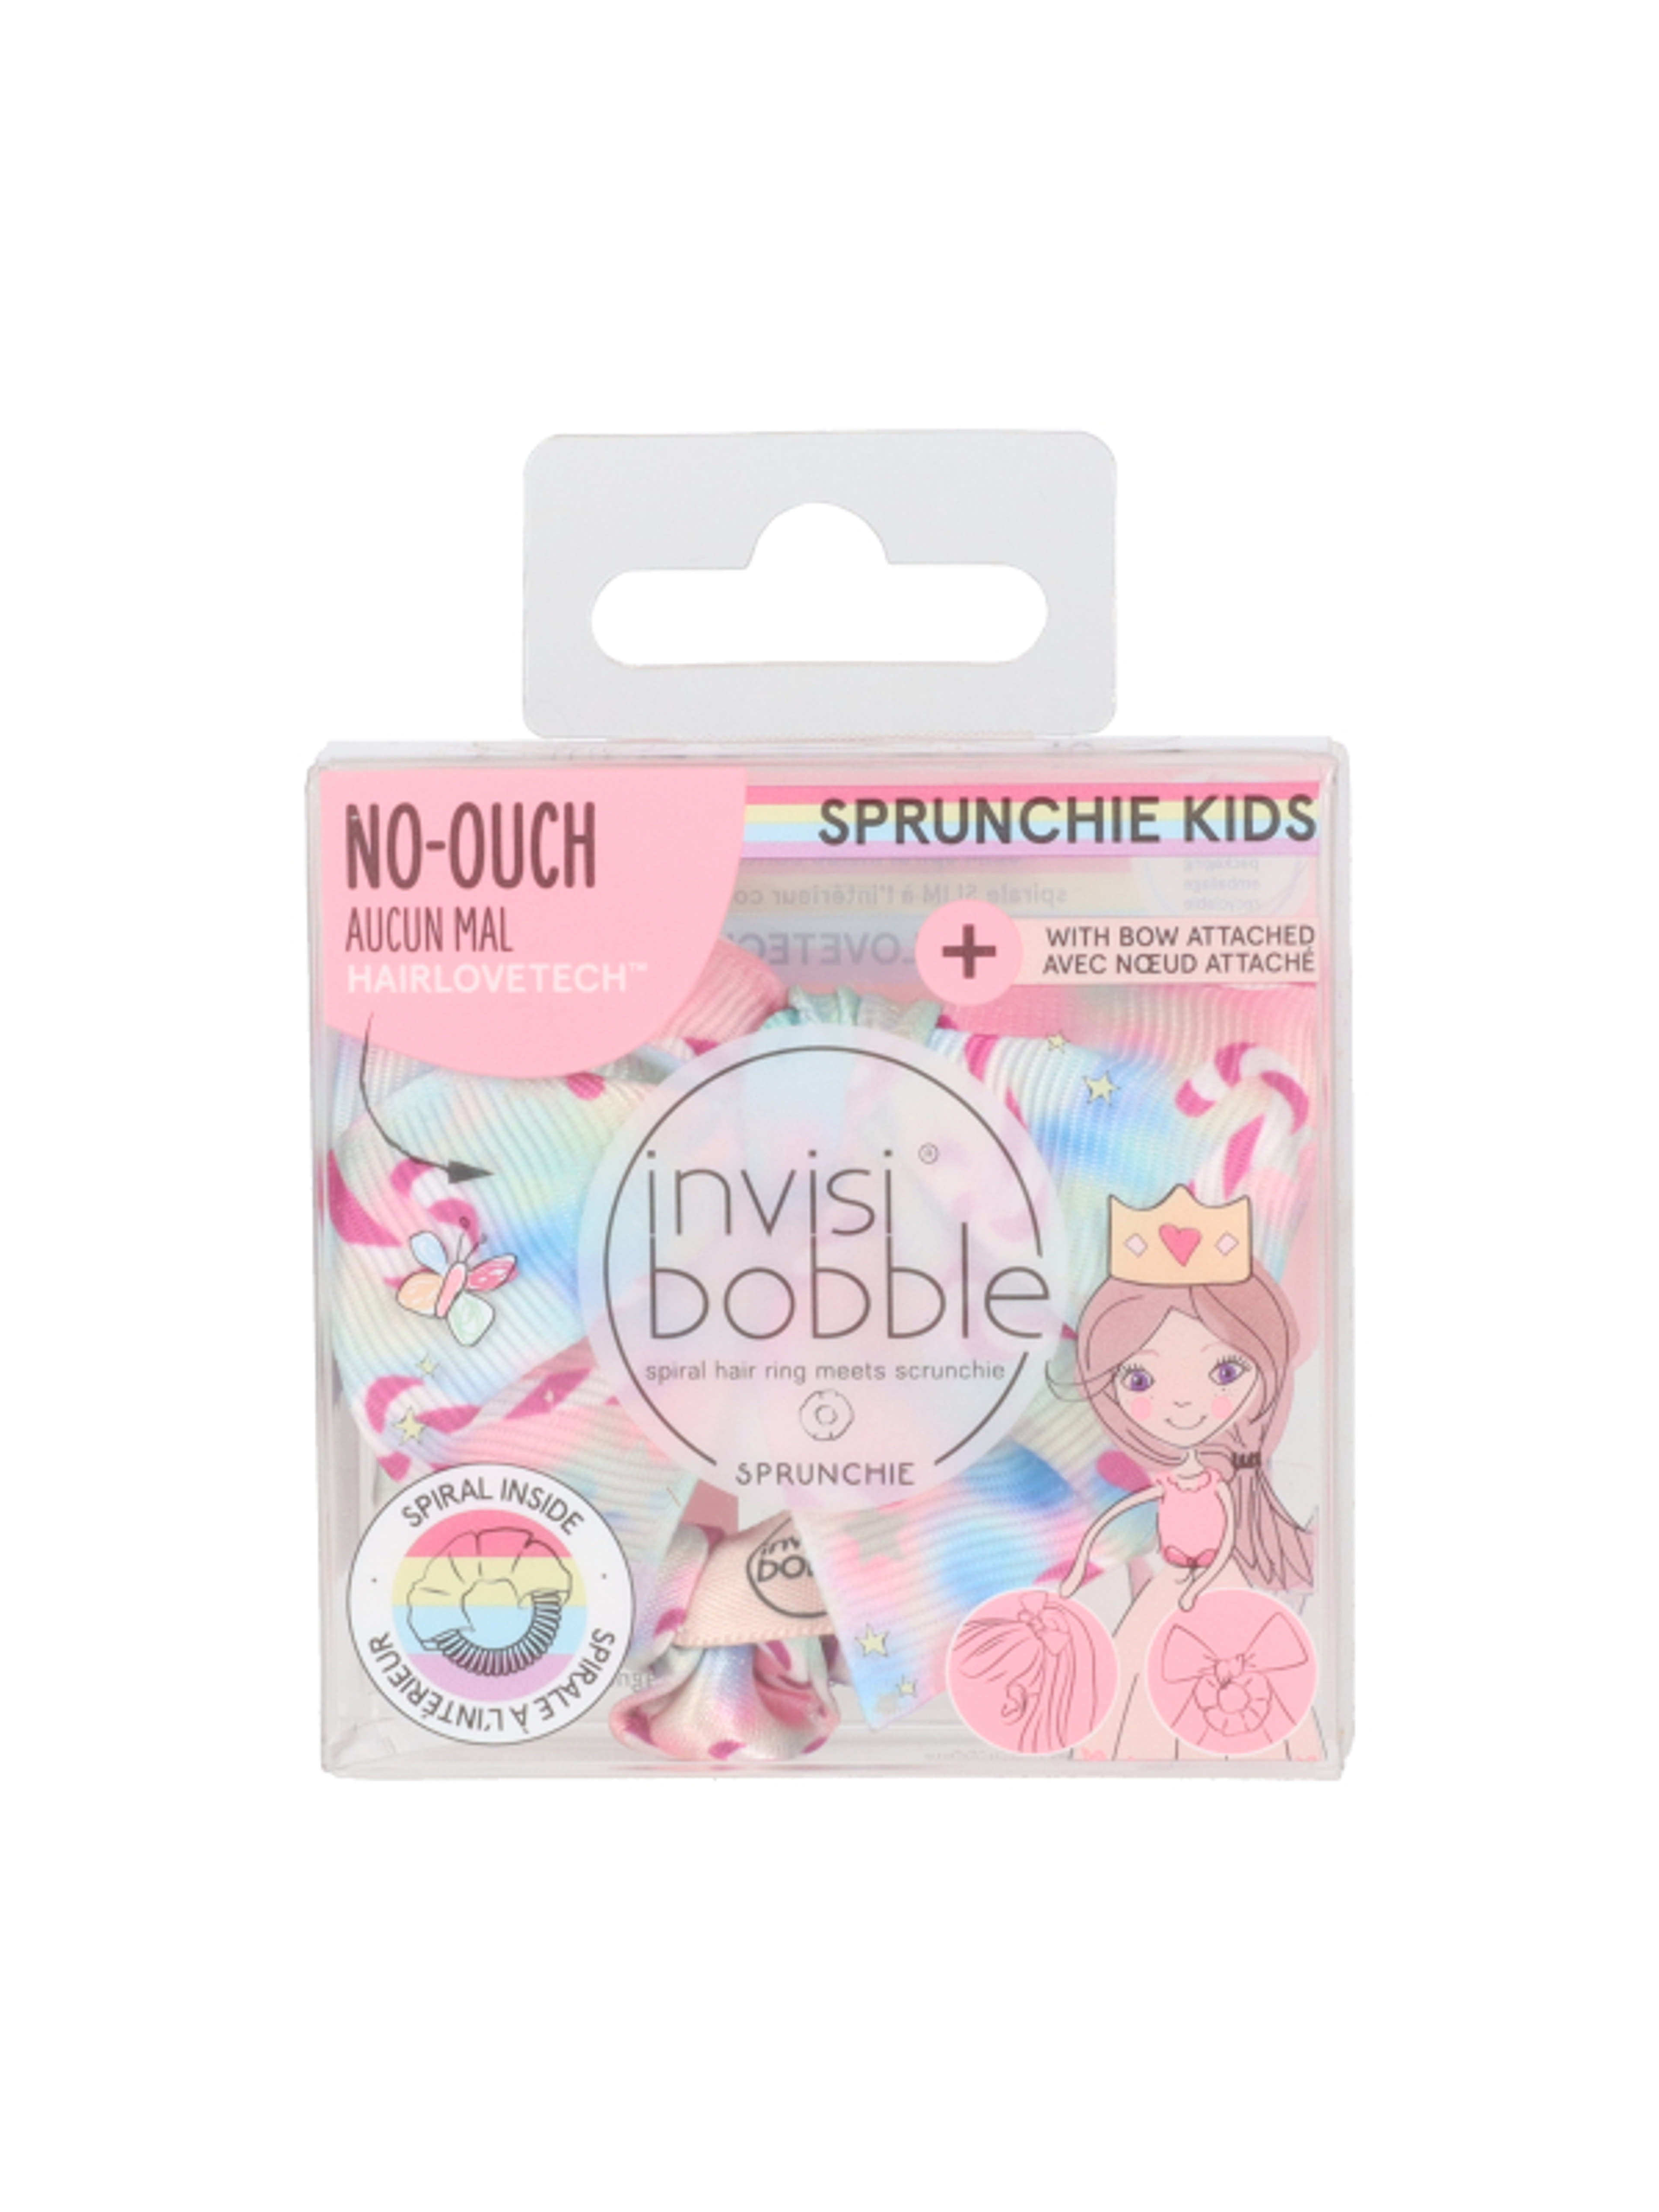 Invisibobble Sprunchie Kids Sweets For My Sweet masnis hajgumi - 1 db-1